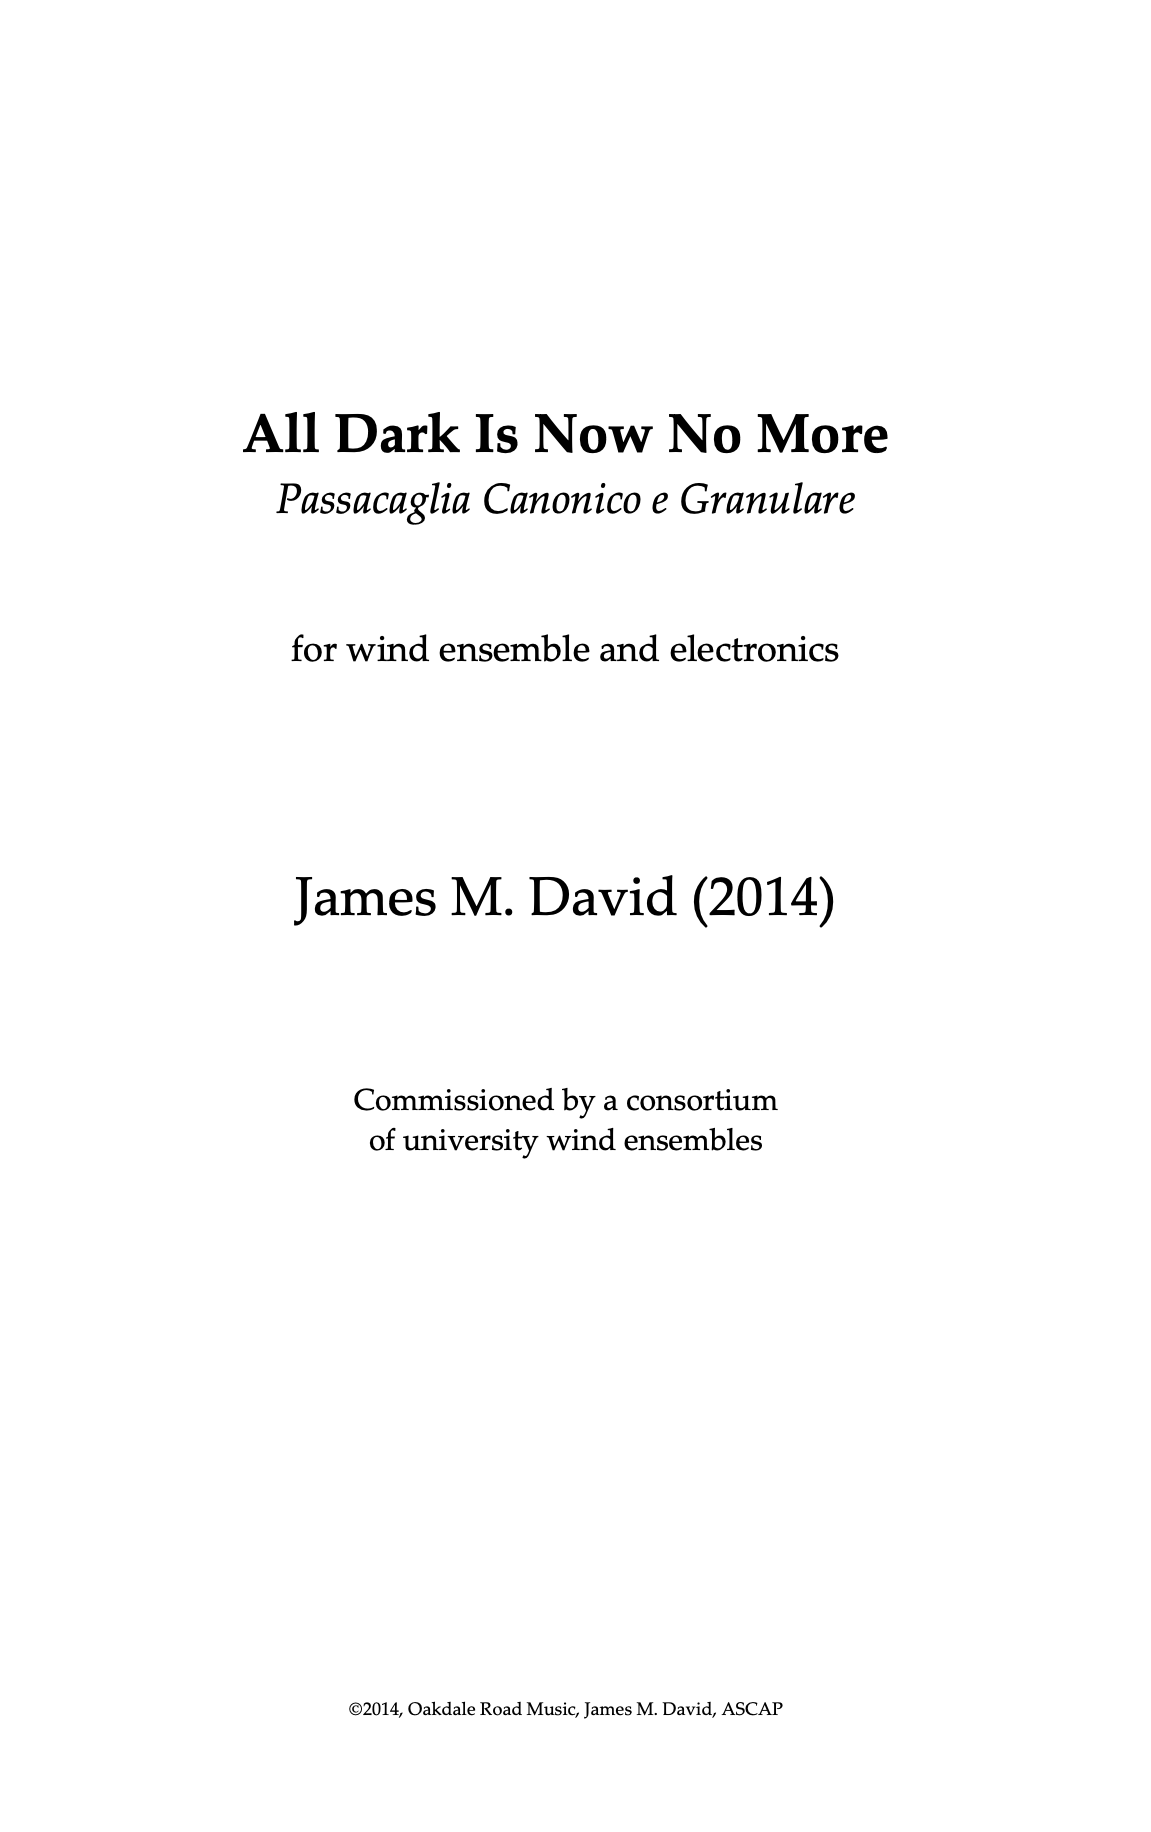 All Dark Is Now No More by James David